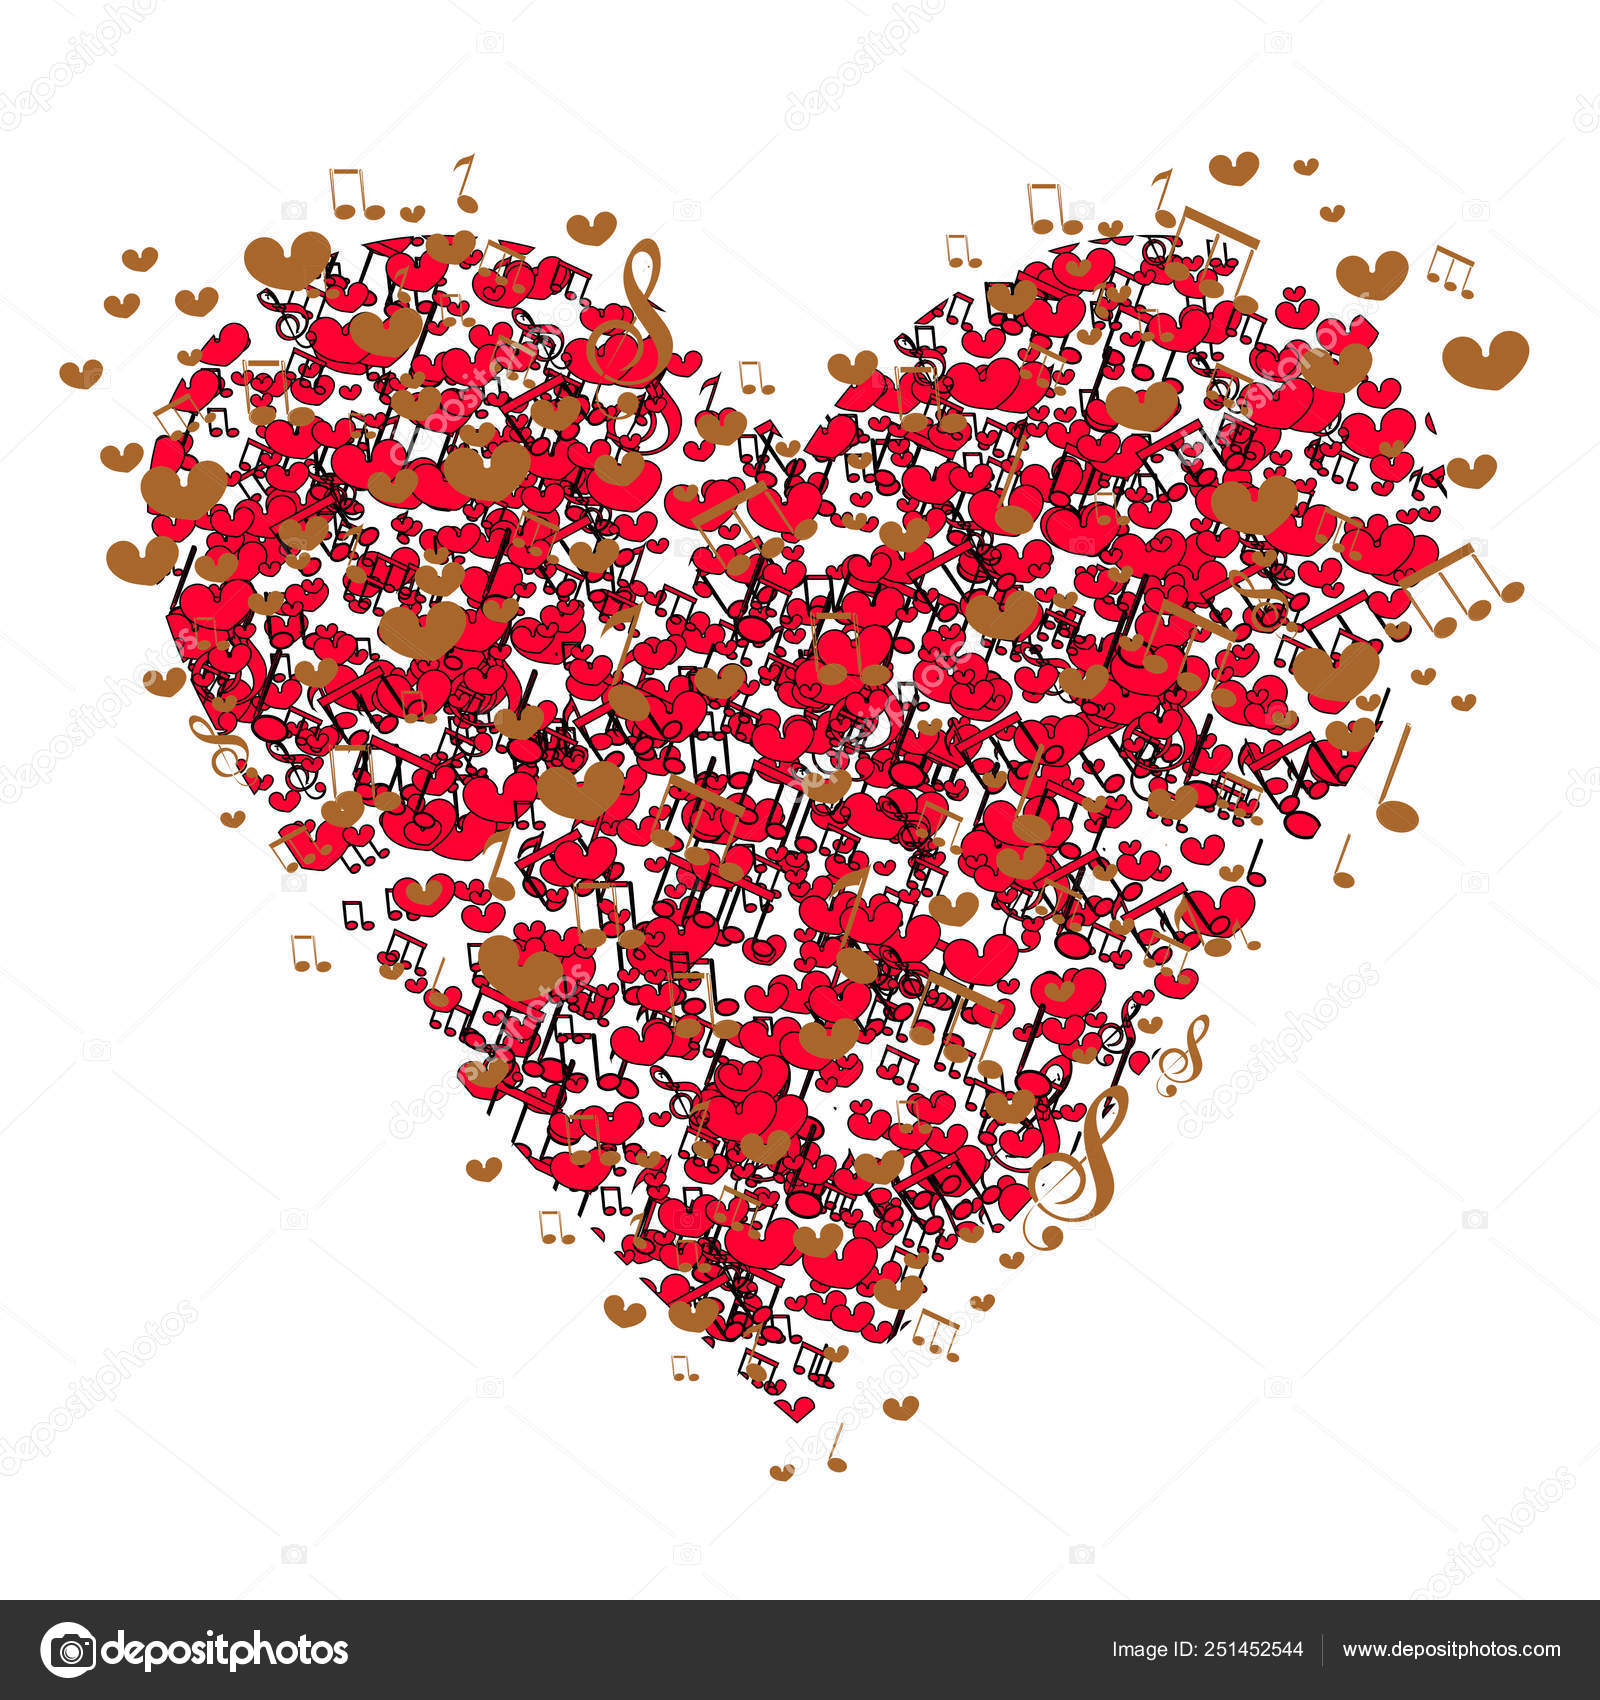 Valentines Heart Made From Music Notes Abstract Design Valentine Card Red Heart On White Background Stock Vector C Dalinas